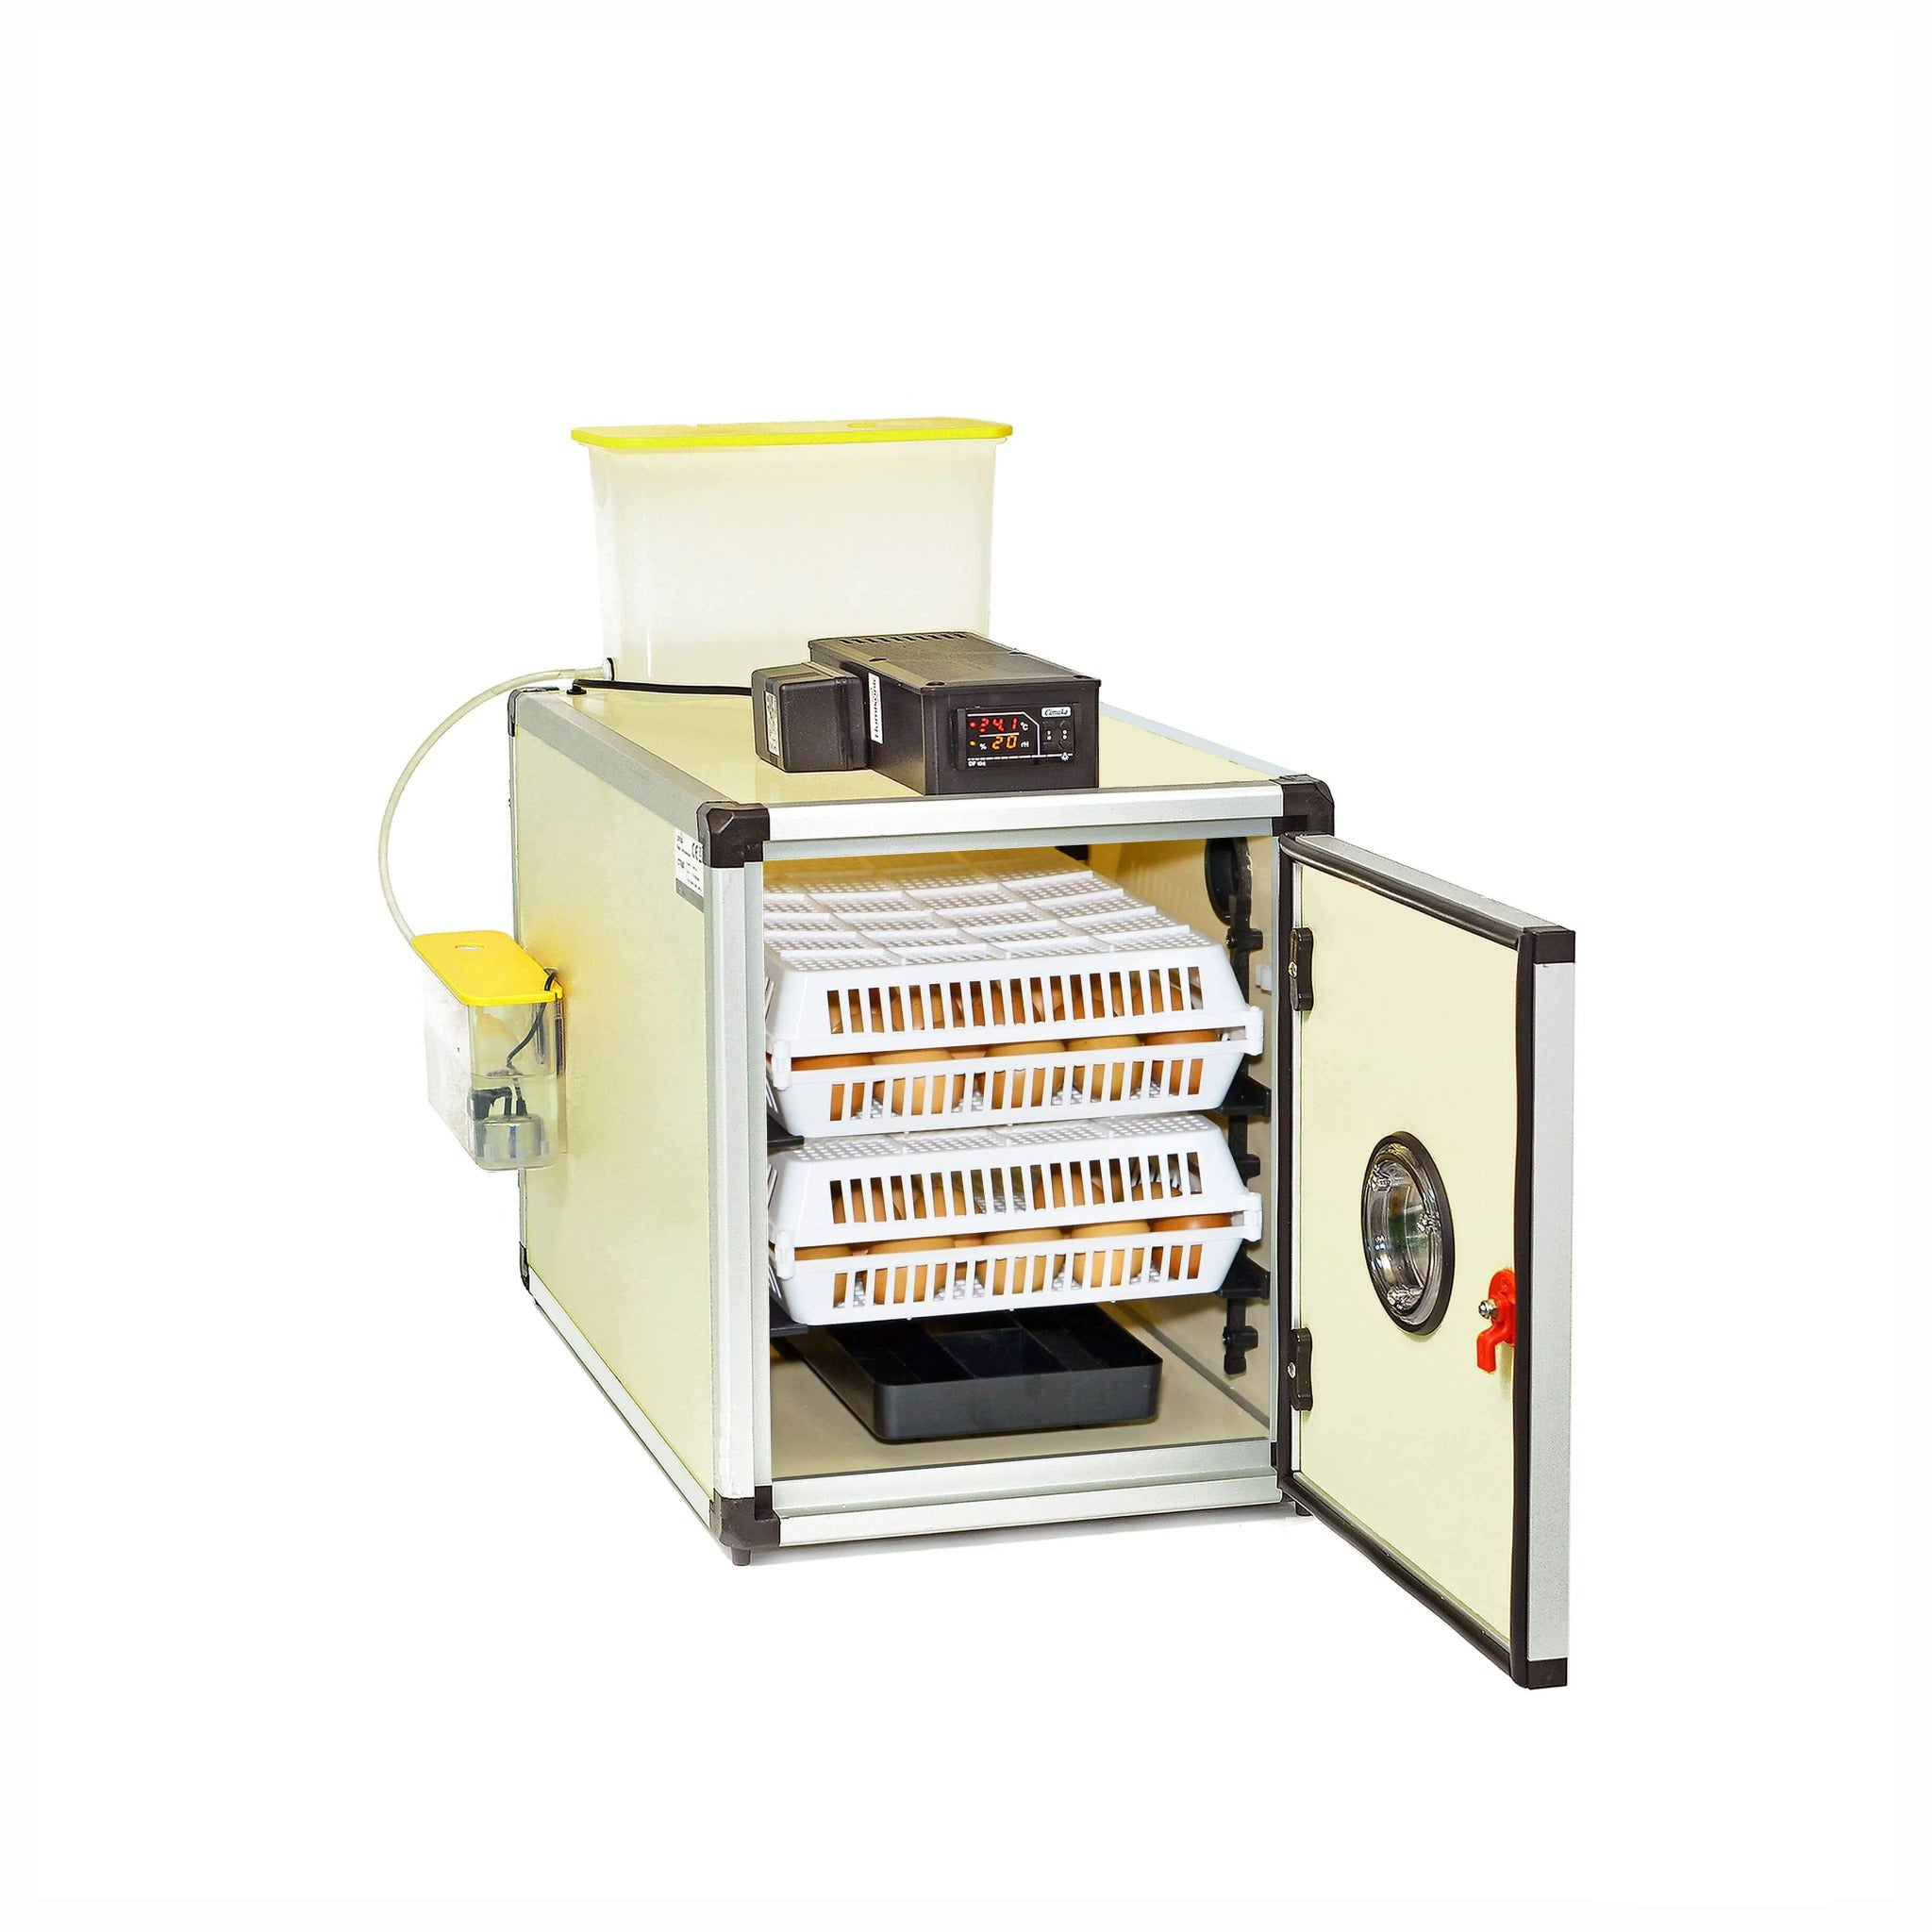 Cimuka CT60 Incubator With 2 Hatching Baskets - Hatching Time